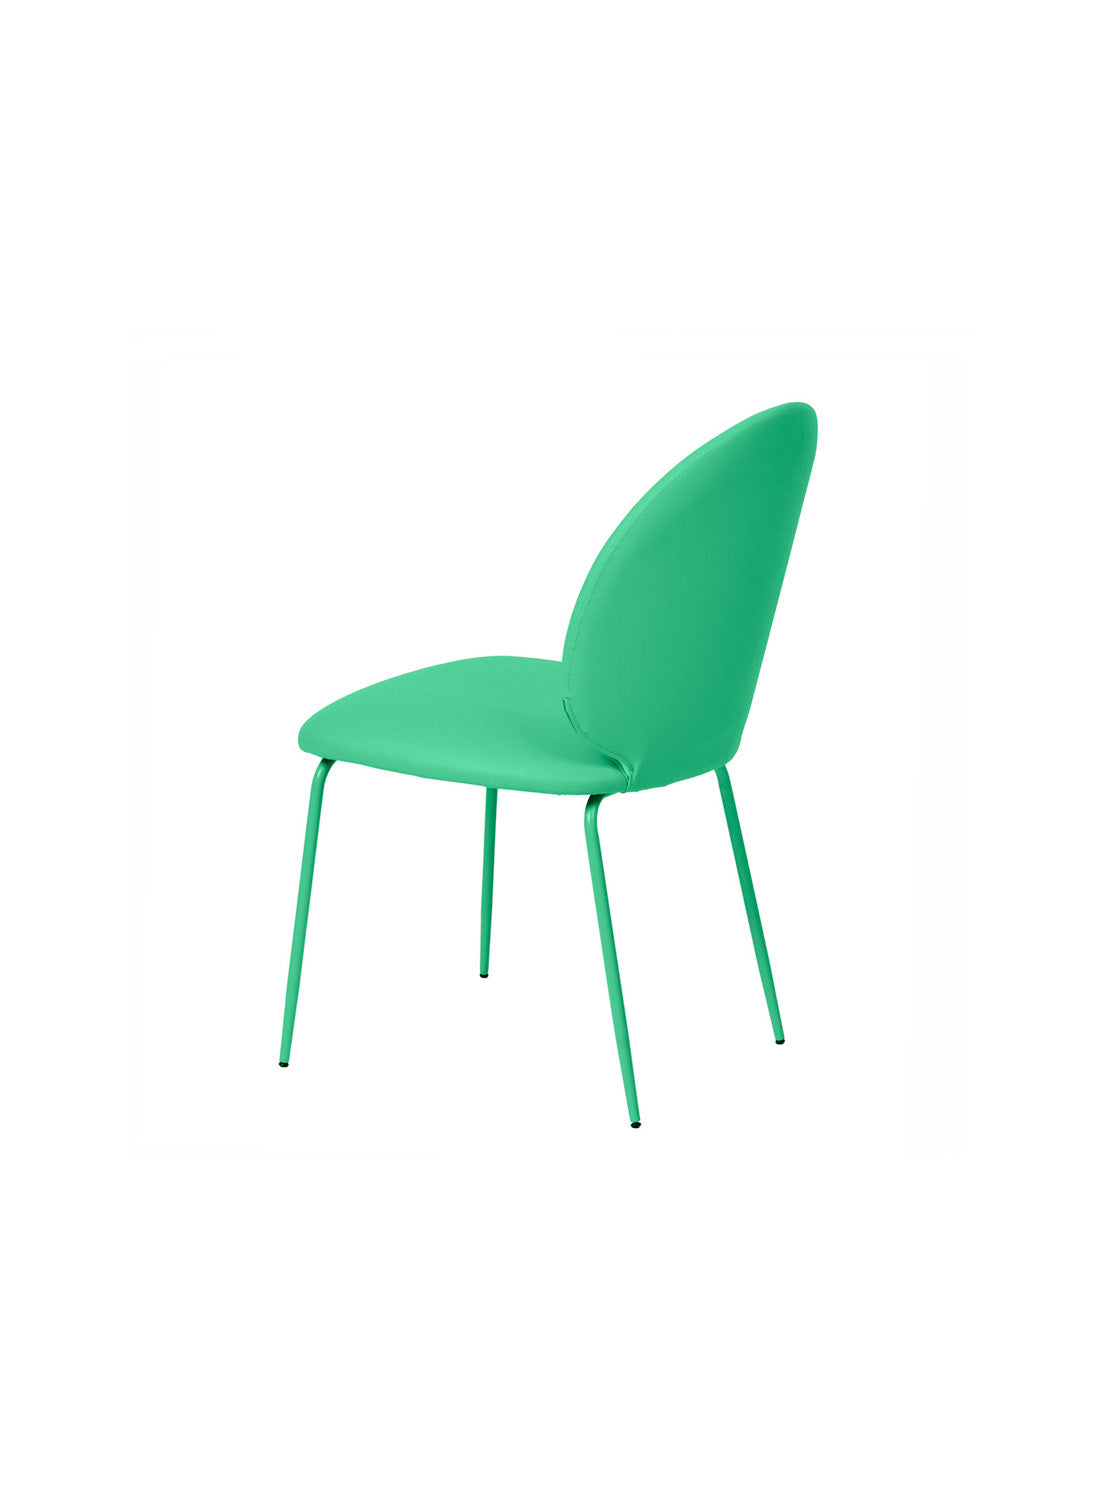 Sandy Dining Chair Set Of 2, green